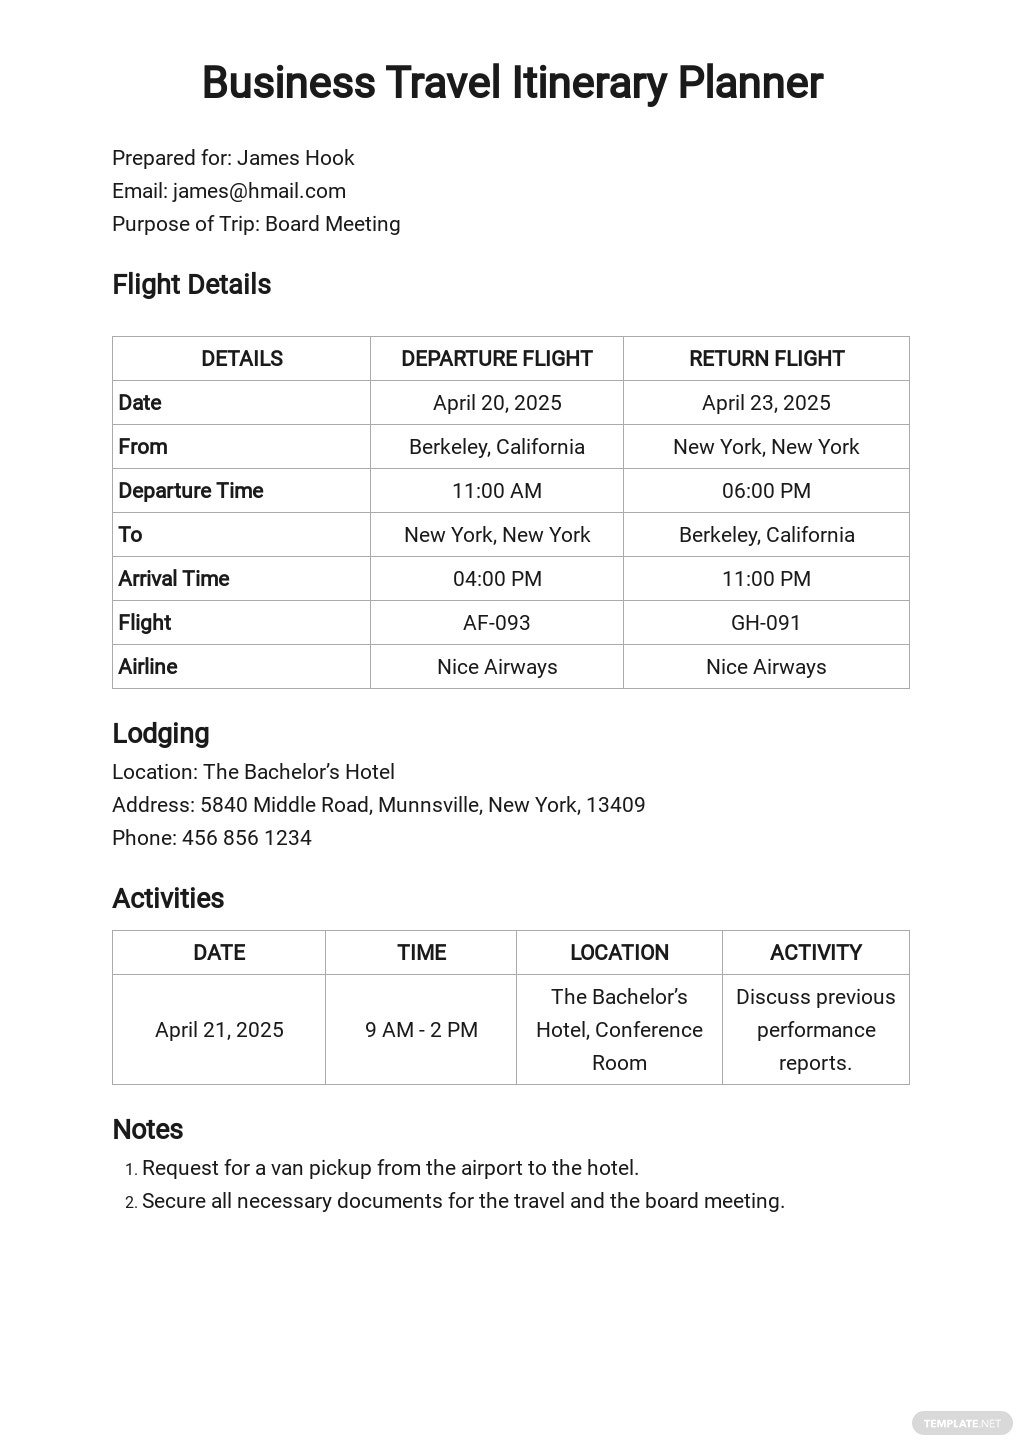 excelfree-business-travel-itinerary-planner-template